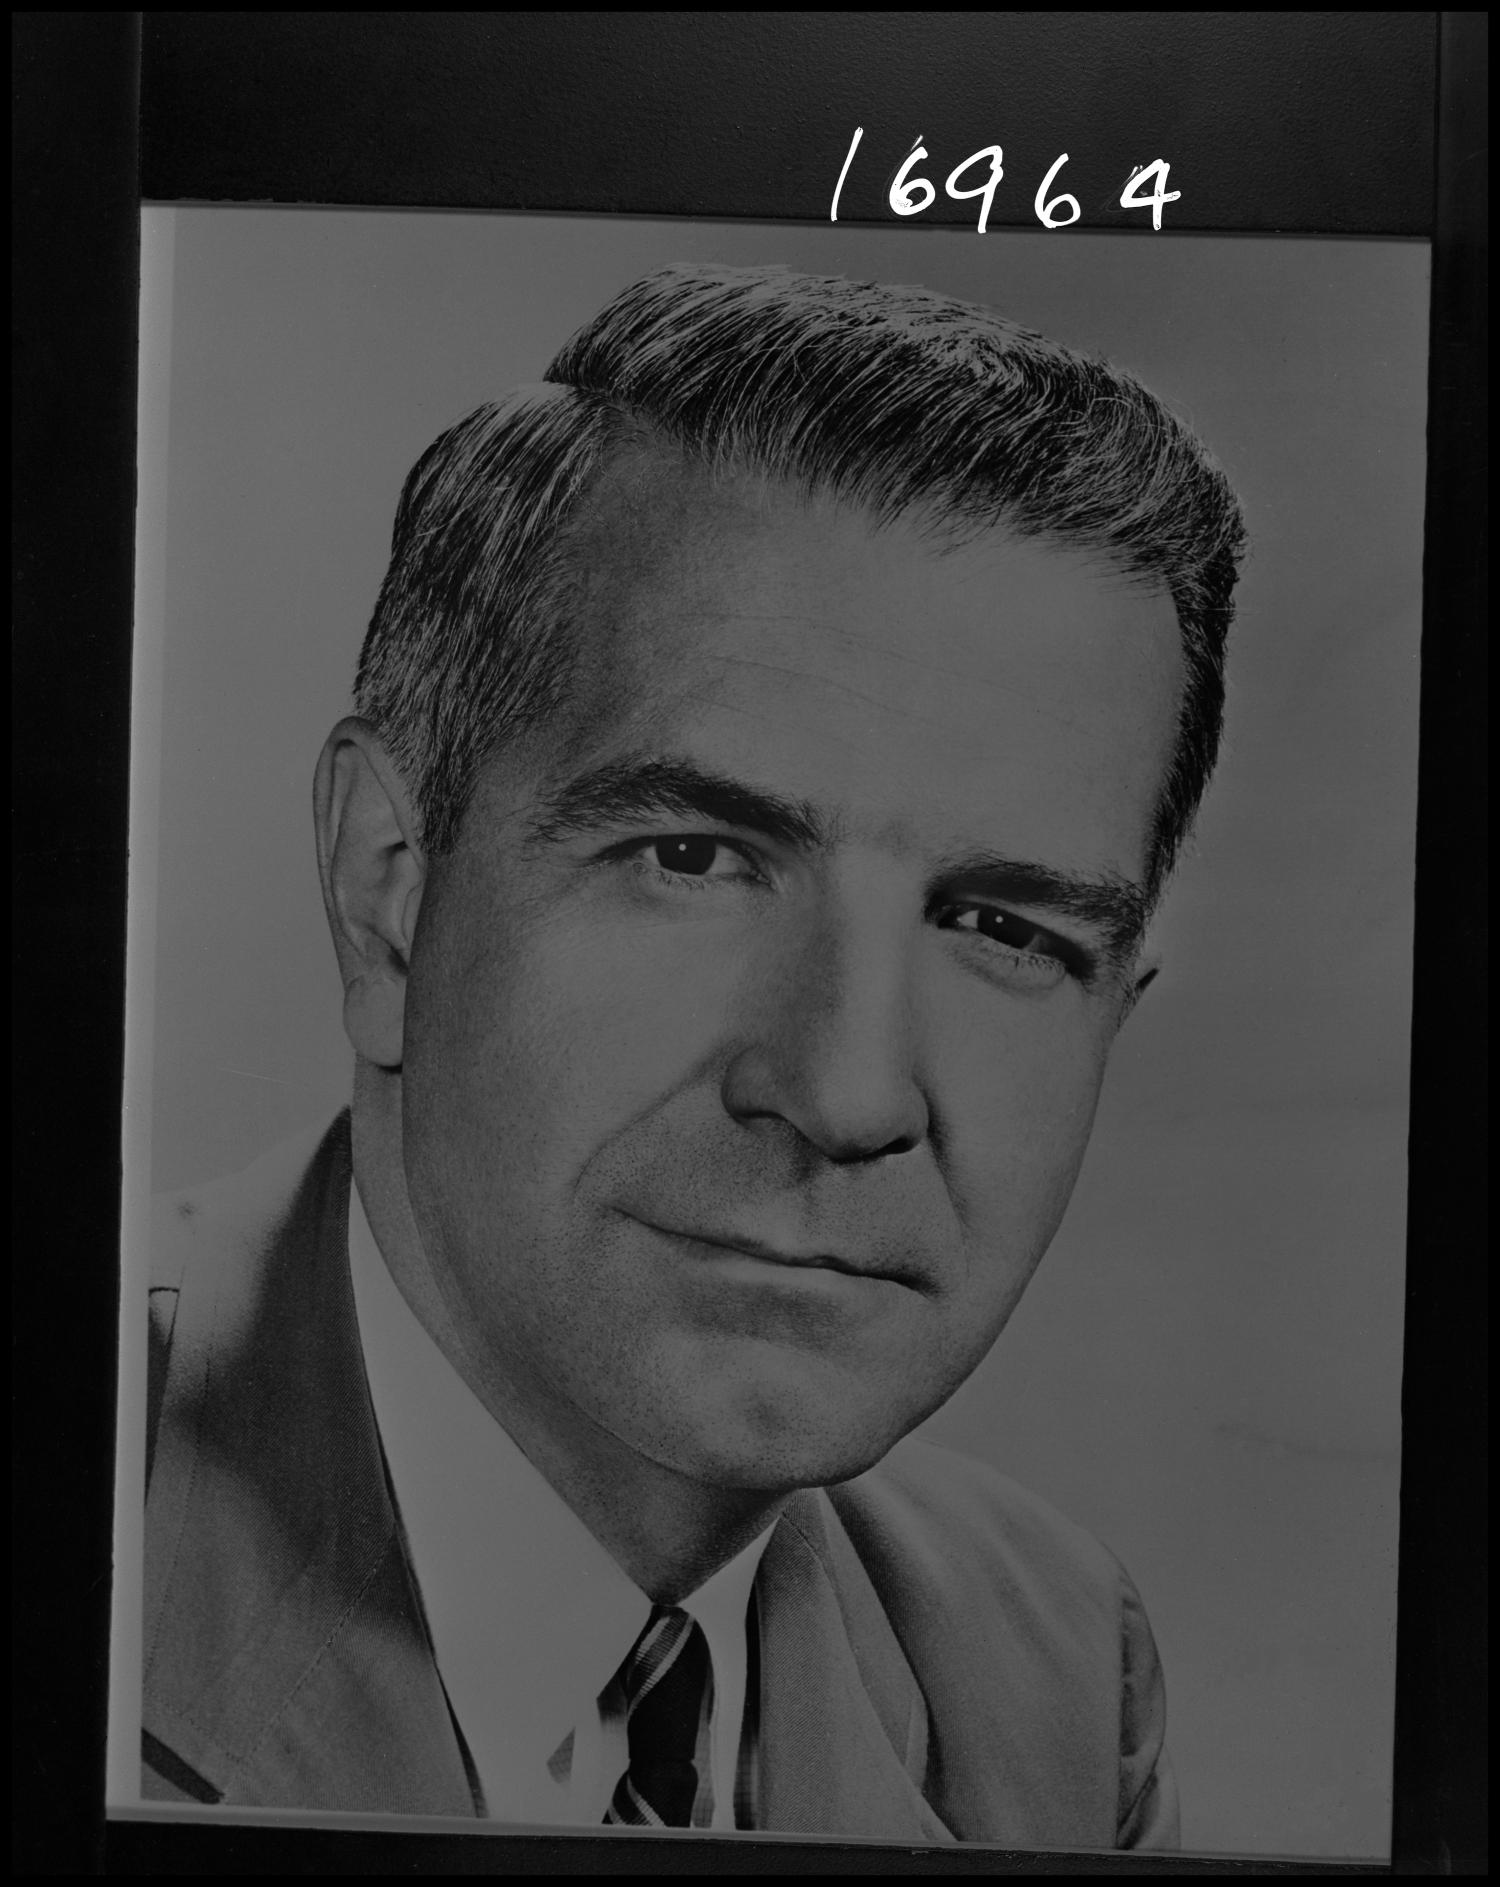 [Portait of Harry Reasoner]
                                                
                                                    [Sequence #]: 1 of 1
                                                